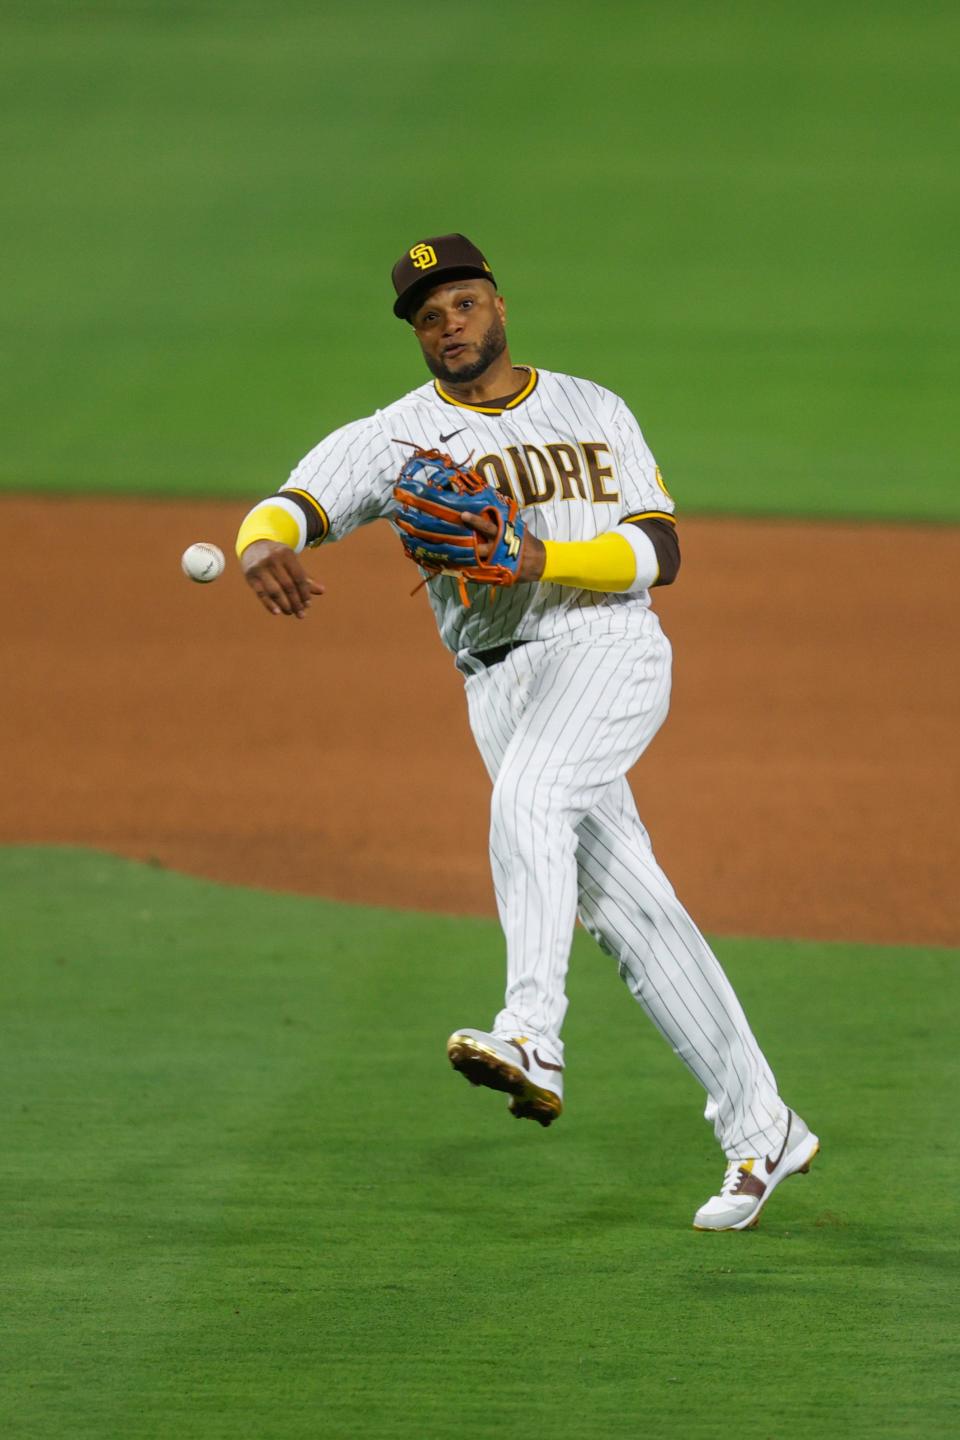 San Diego Padres second baseman Robinson Cano makes the throw to first base to retire Milwaukee Brewers' Kolten Wong during the seventh inning of a baseball game Monday, May 23, 2022, in San Diego. (AP Photo/Mike McGinnis)